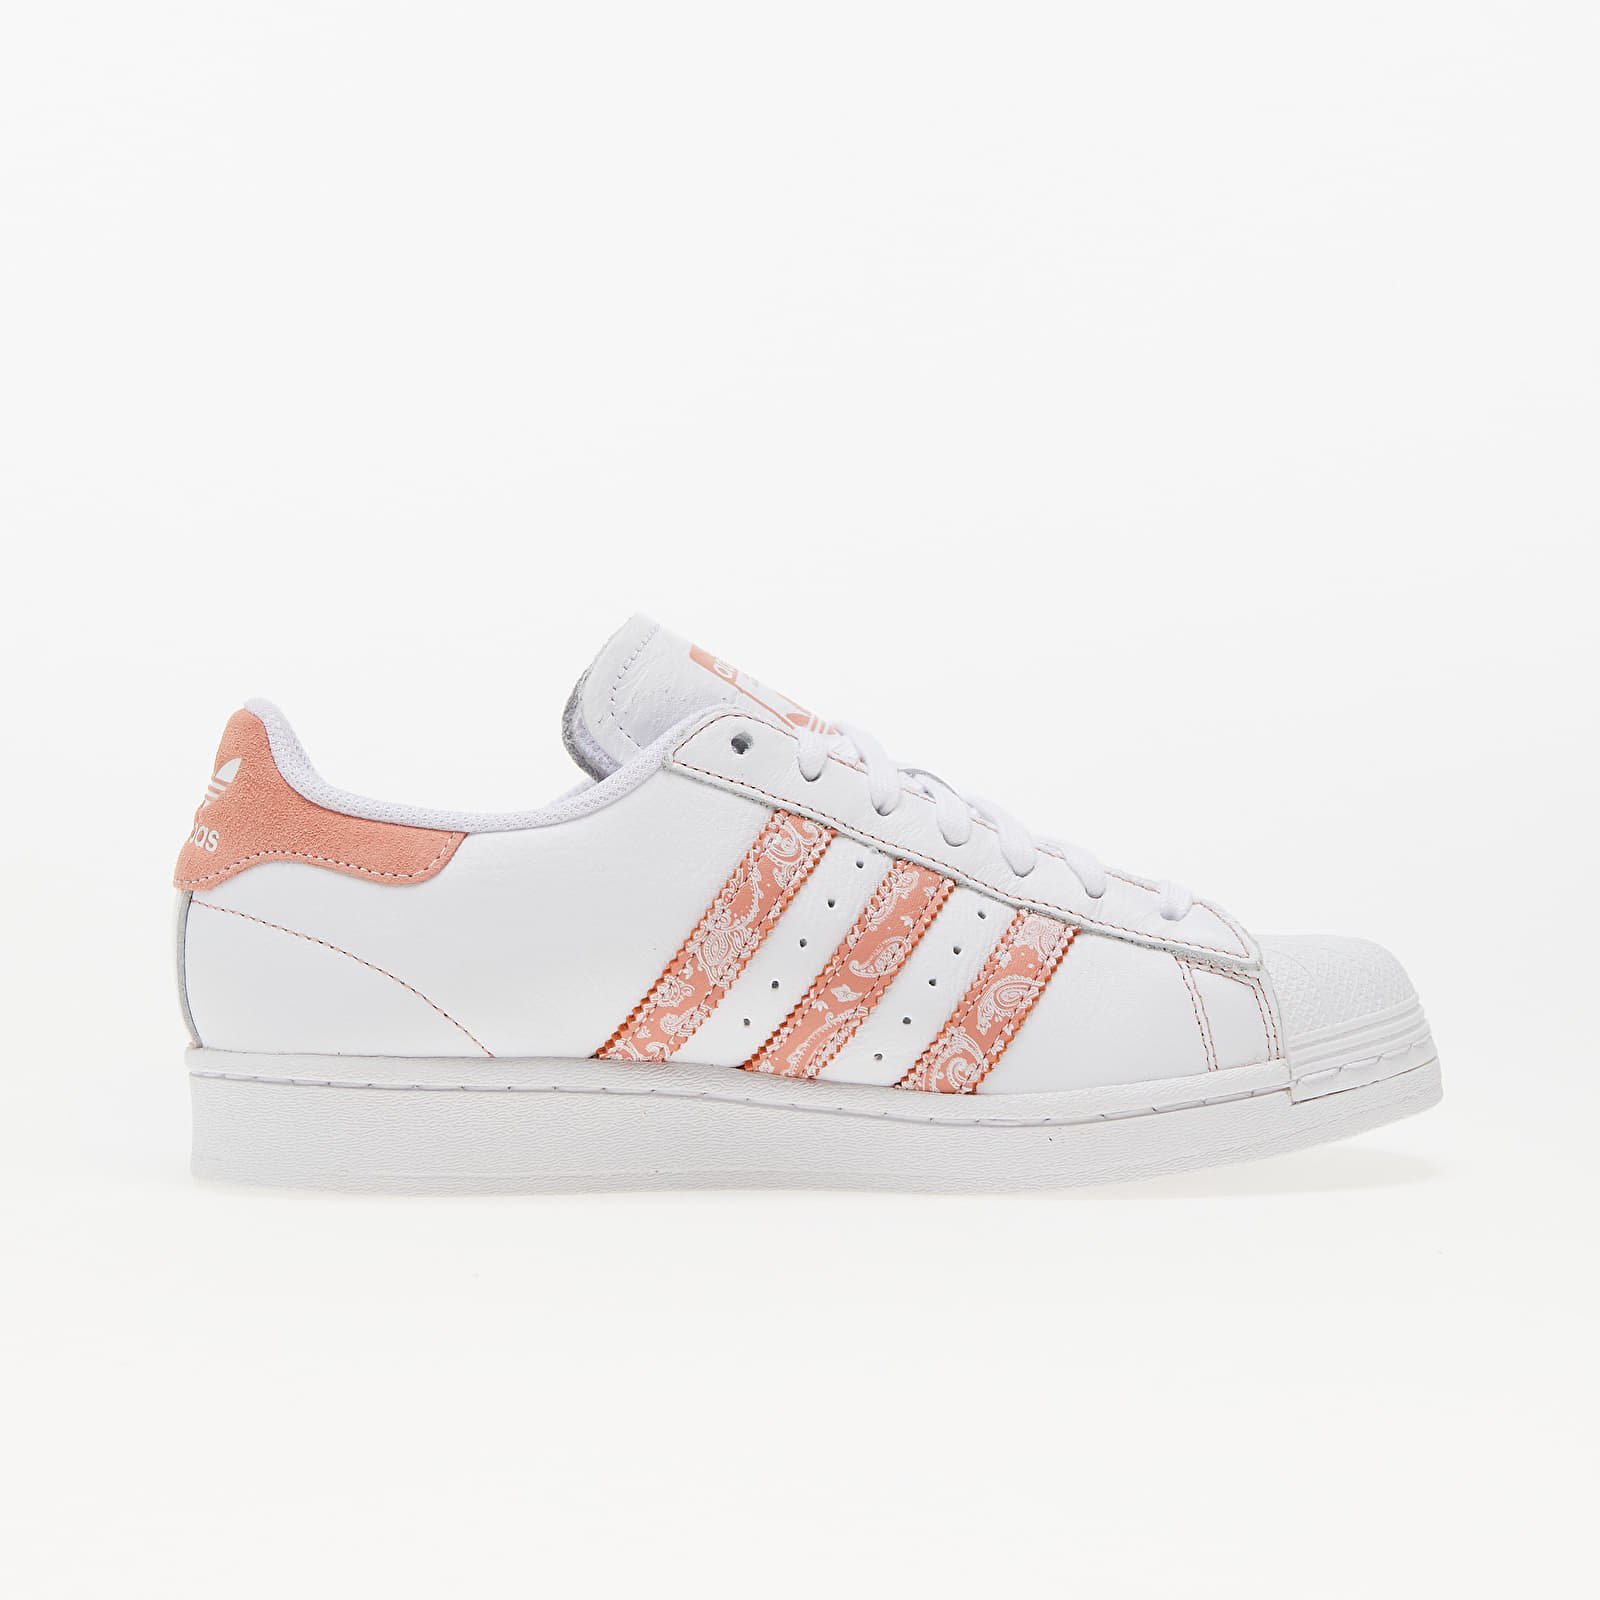 adidas Superstar W White, Women's low-top sneakers